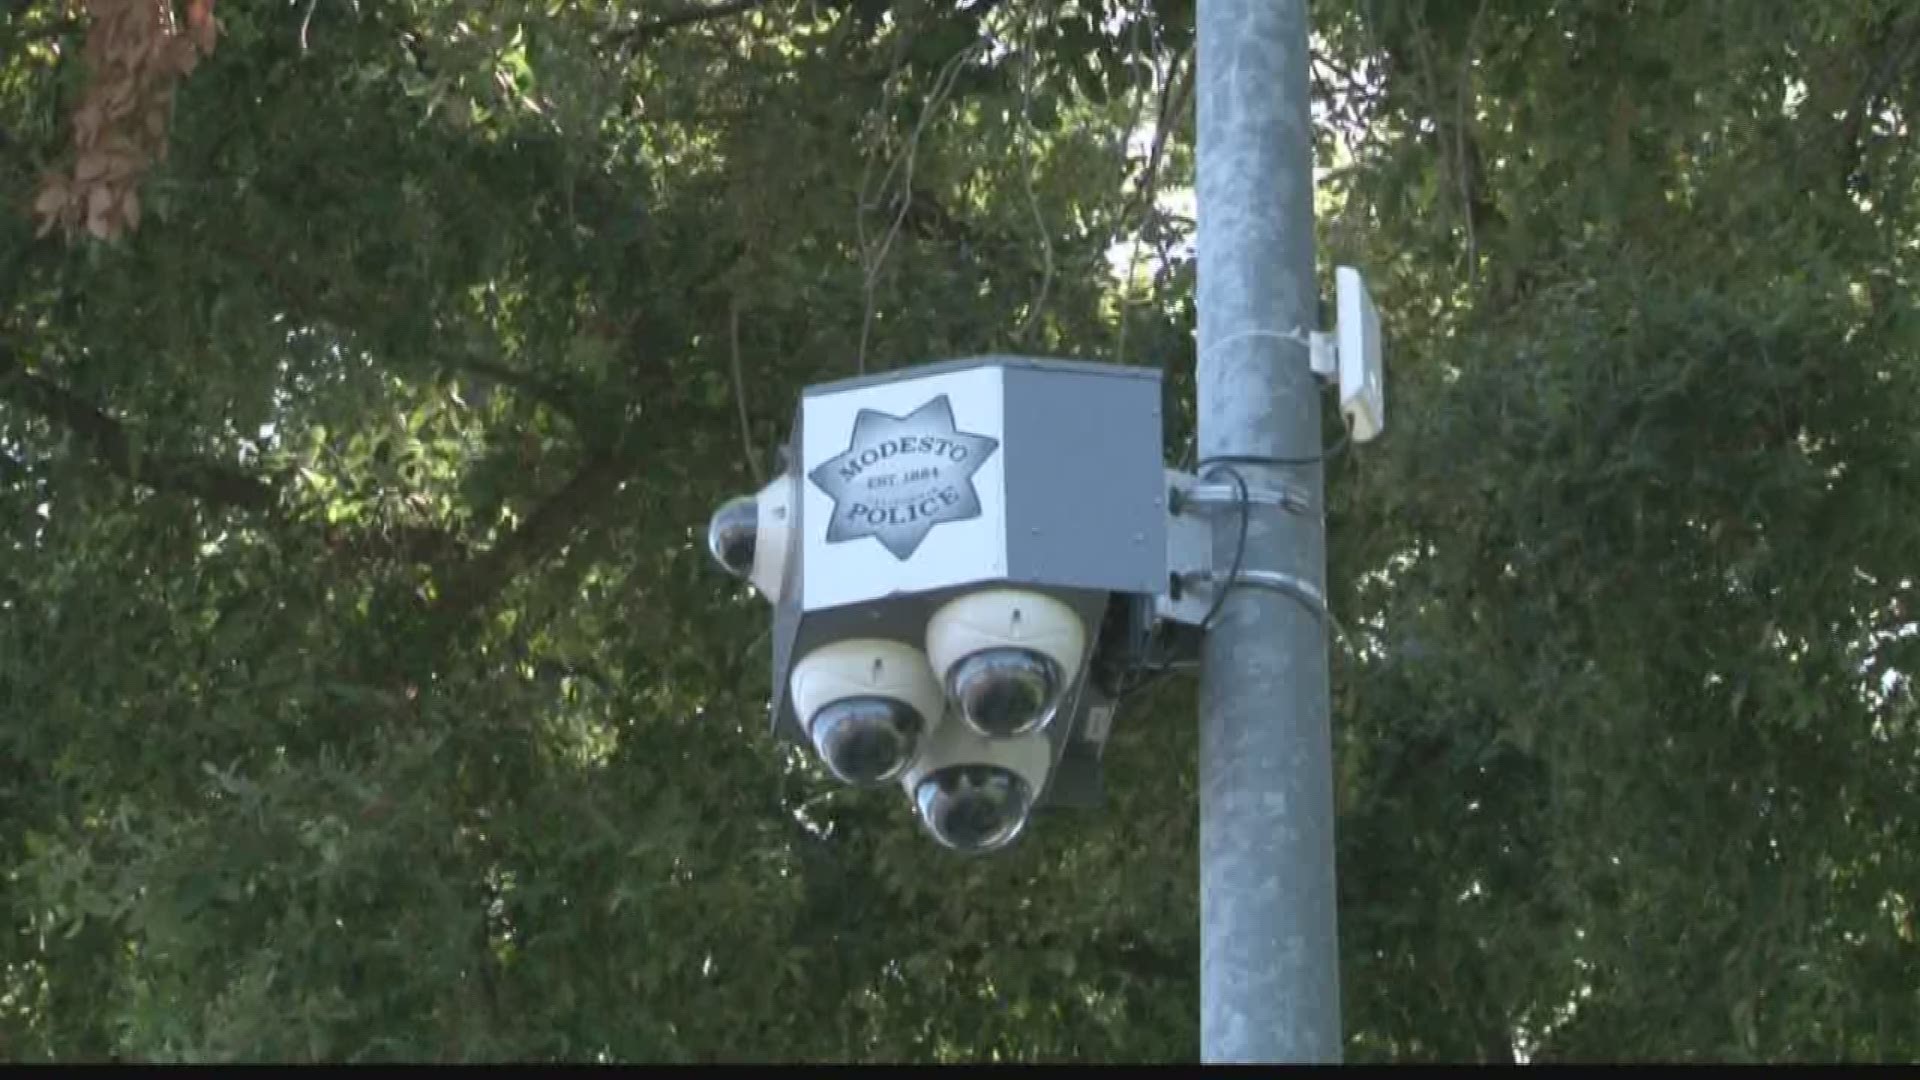 This is part of the city's Real Time Crime Center which gives them access to 50 live traffic cameras  (Sep. 19, 2017)